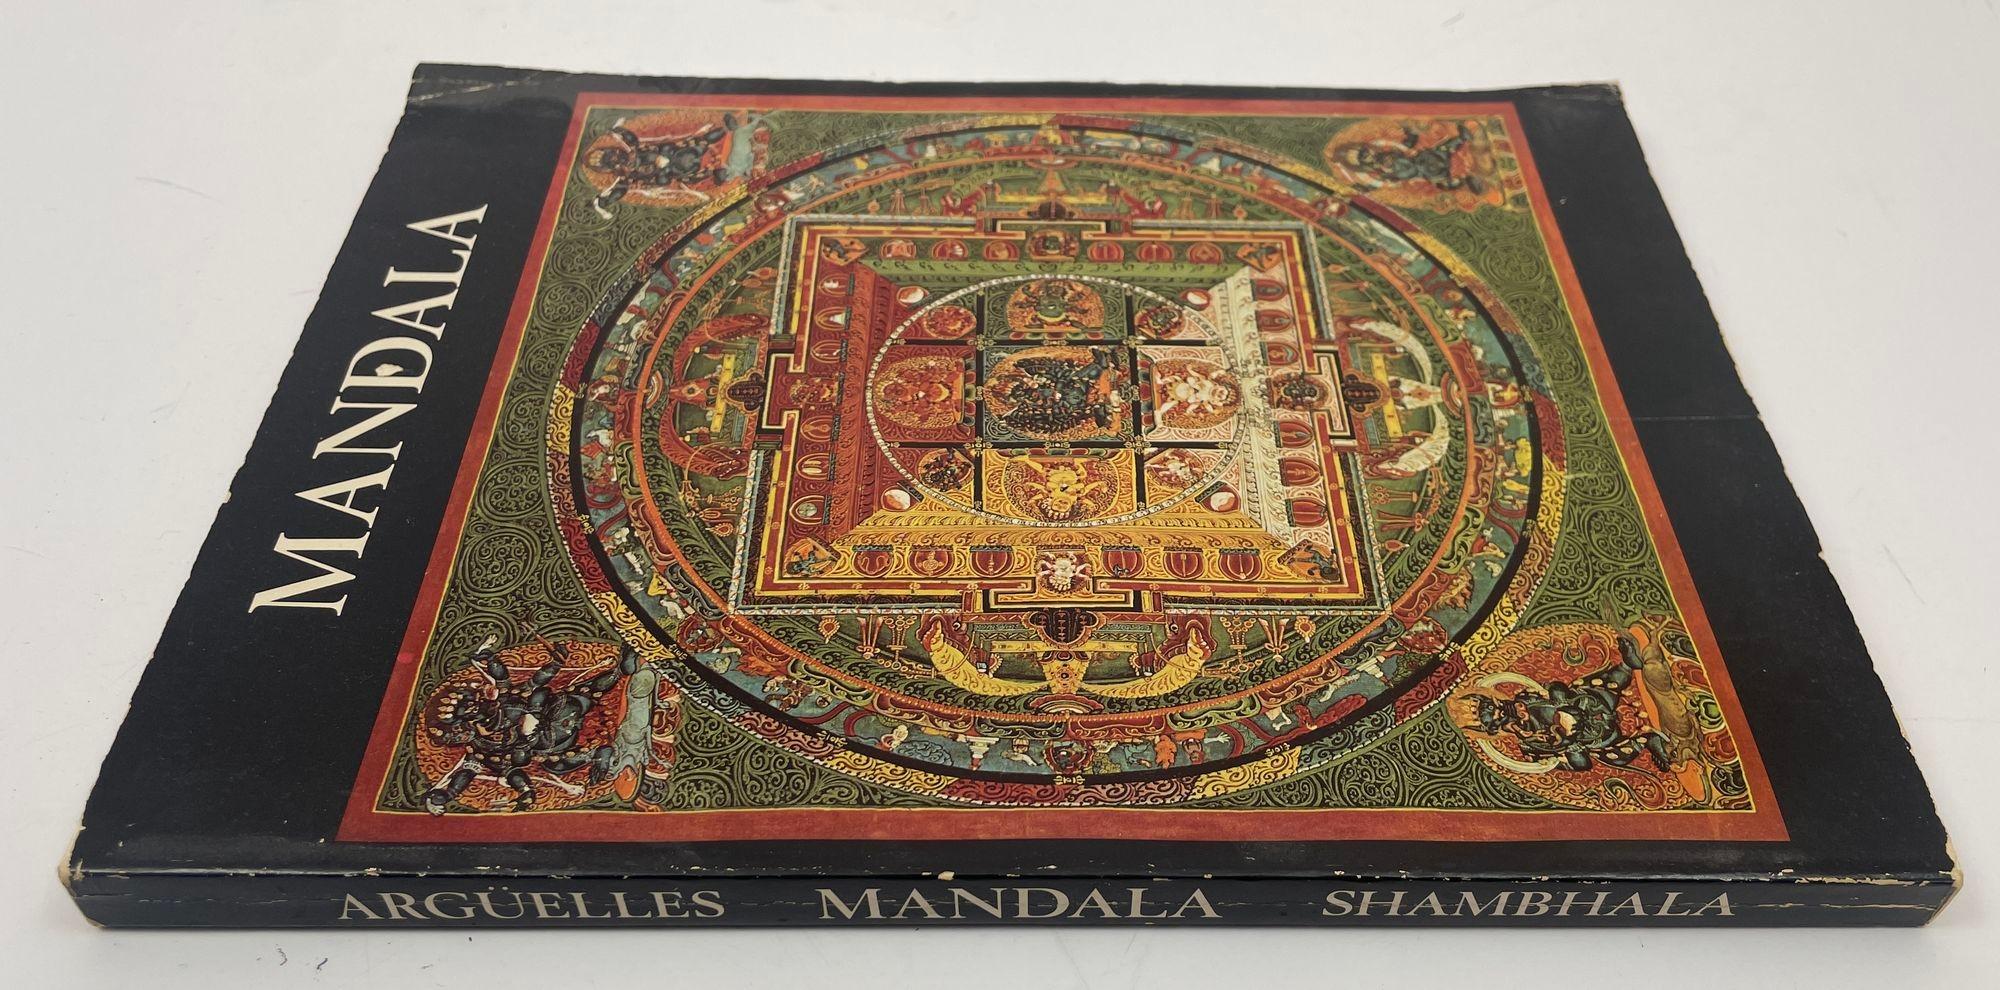 MANDALA By Jose and Miriam Arguelles Softcover Book.
Shambala 1st Edition 1972 - Mandala - English text 140 pages
A wonderful trip through the art of the last few centuries.This lavishly illustrated classic, selling over 70,000 copies in English and